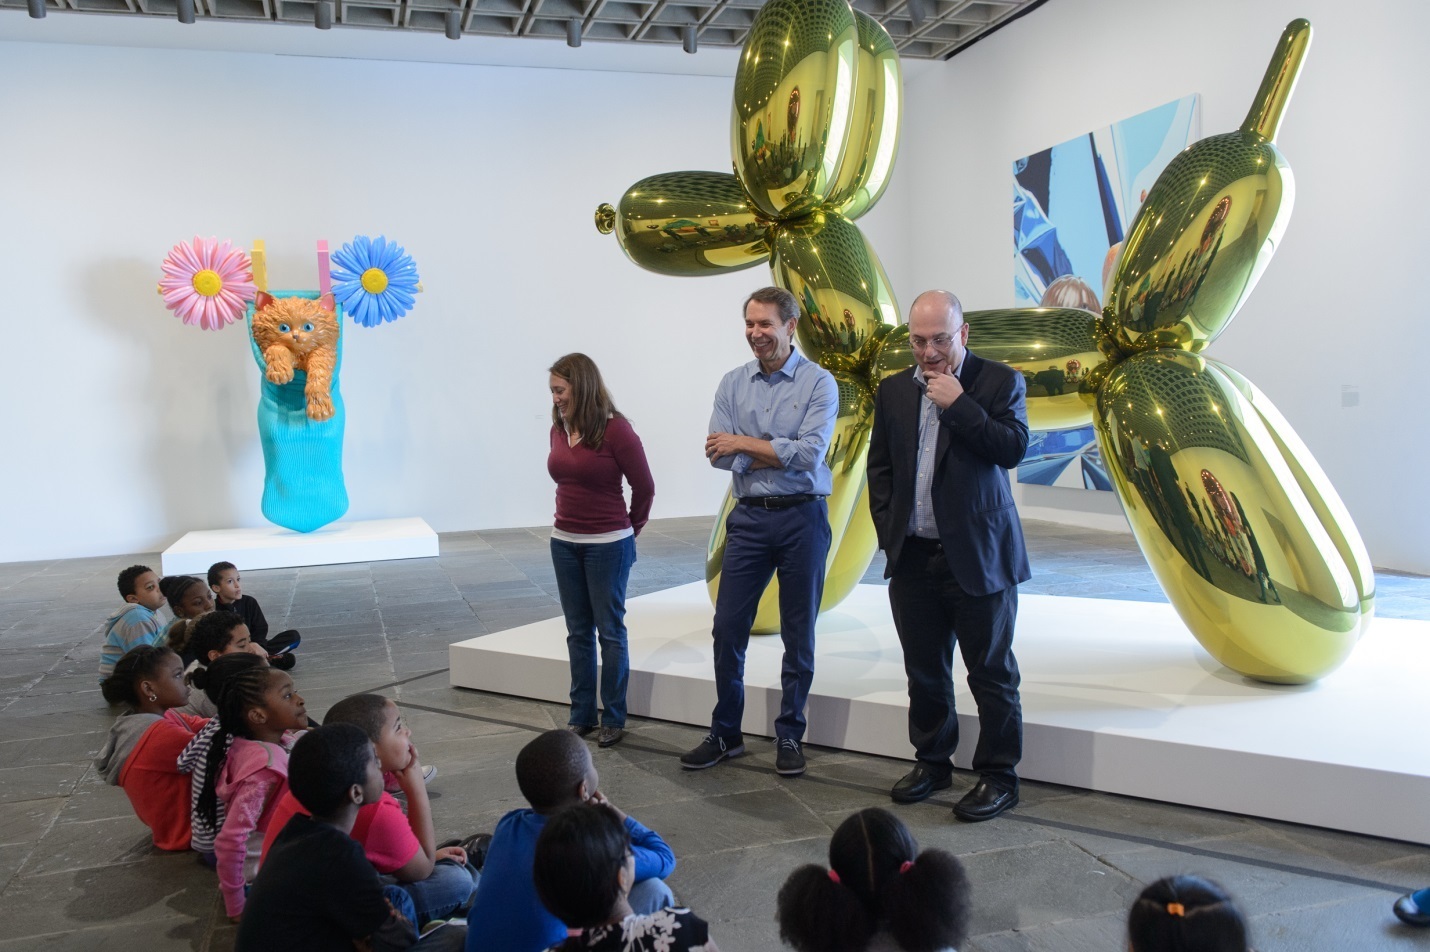 Artist Jeff Koons and collector Steve Cohen speak to kids at the Whitney Museum. Photo: courtesy Whitney Museum, New York.